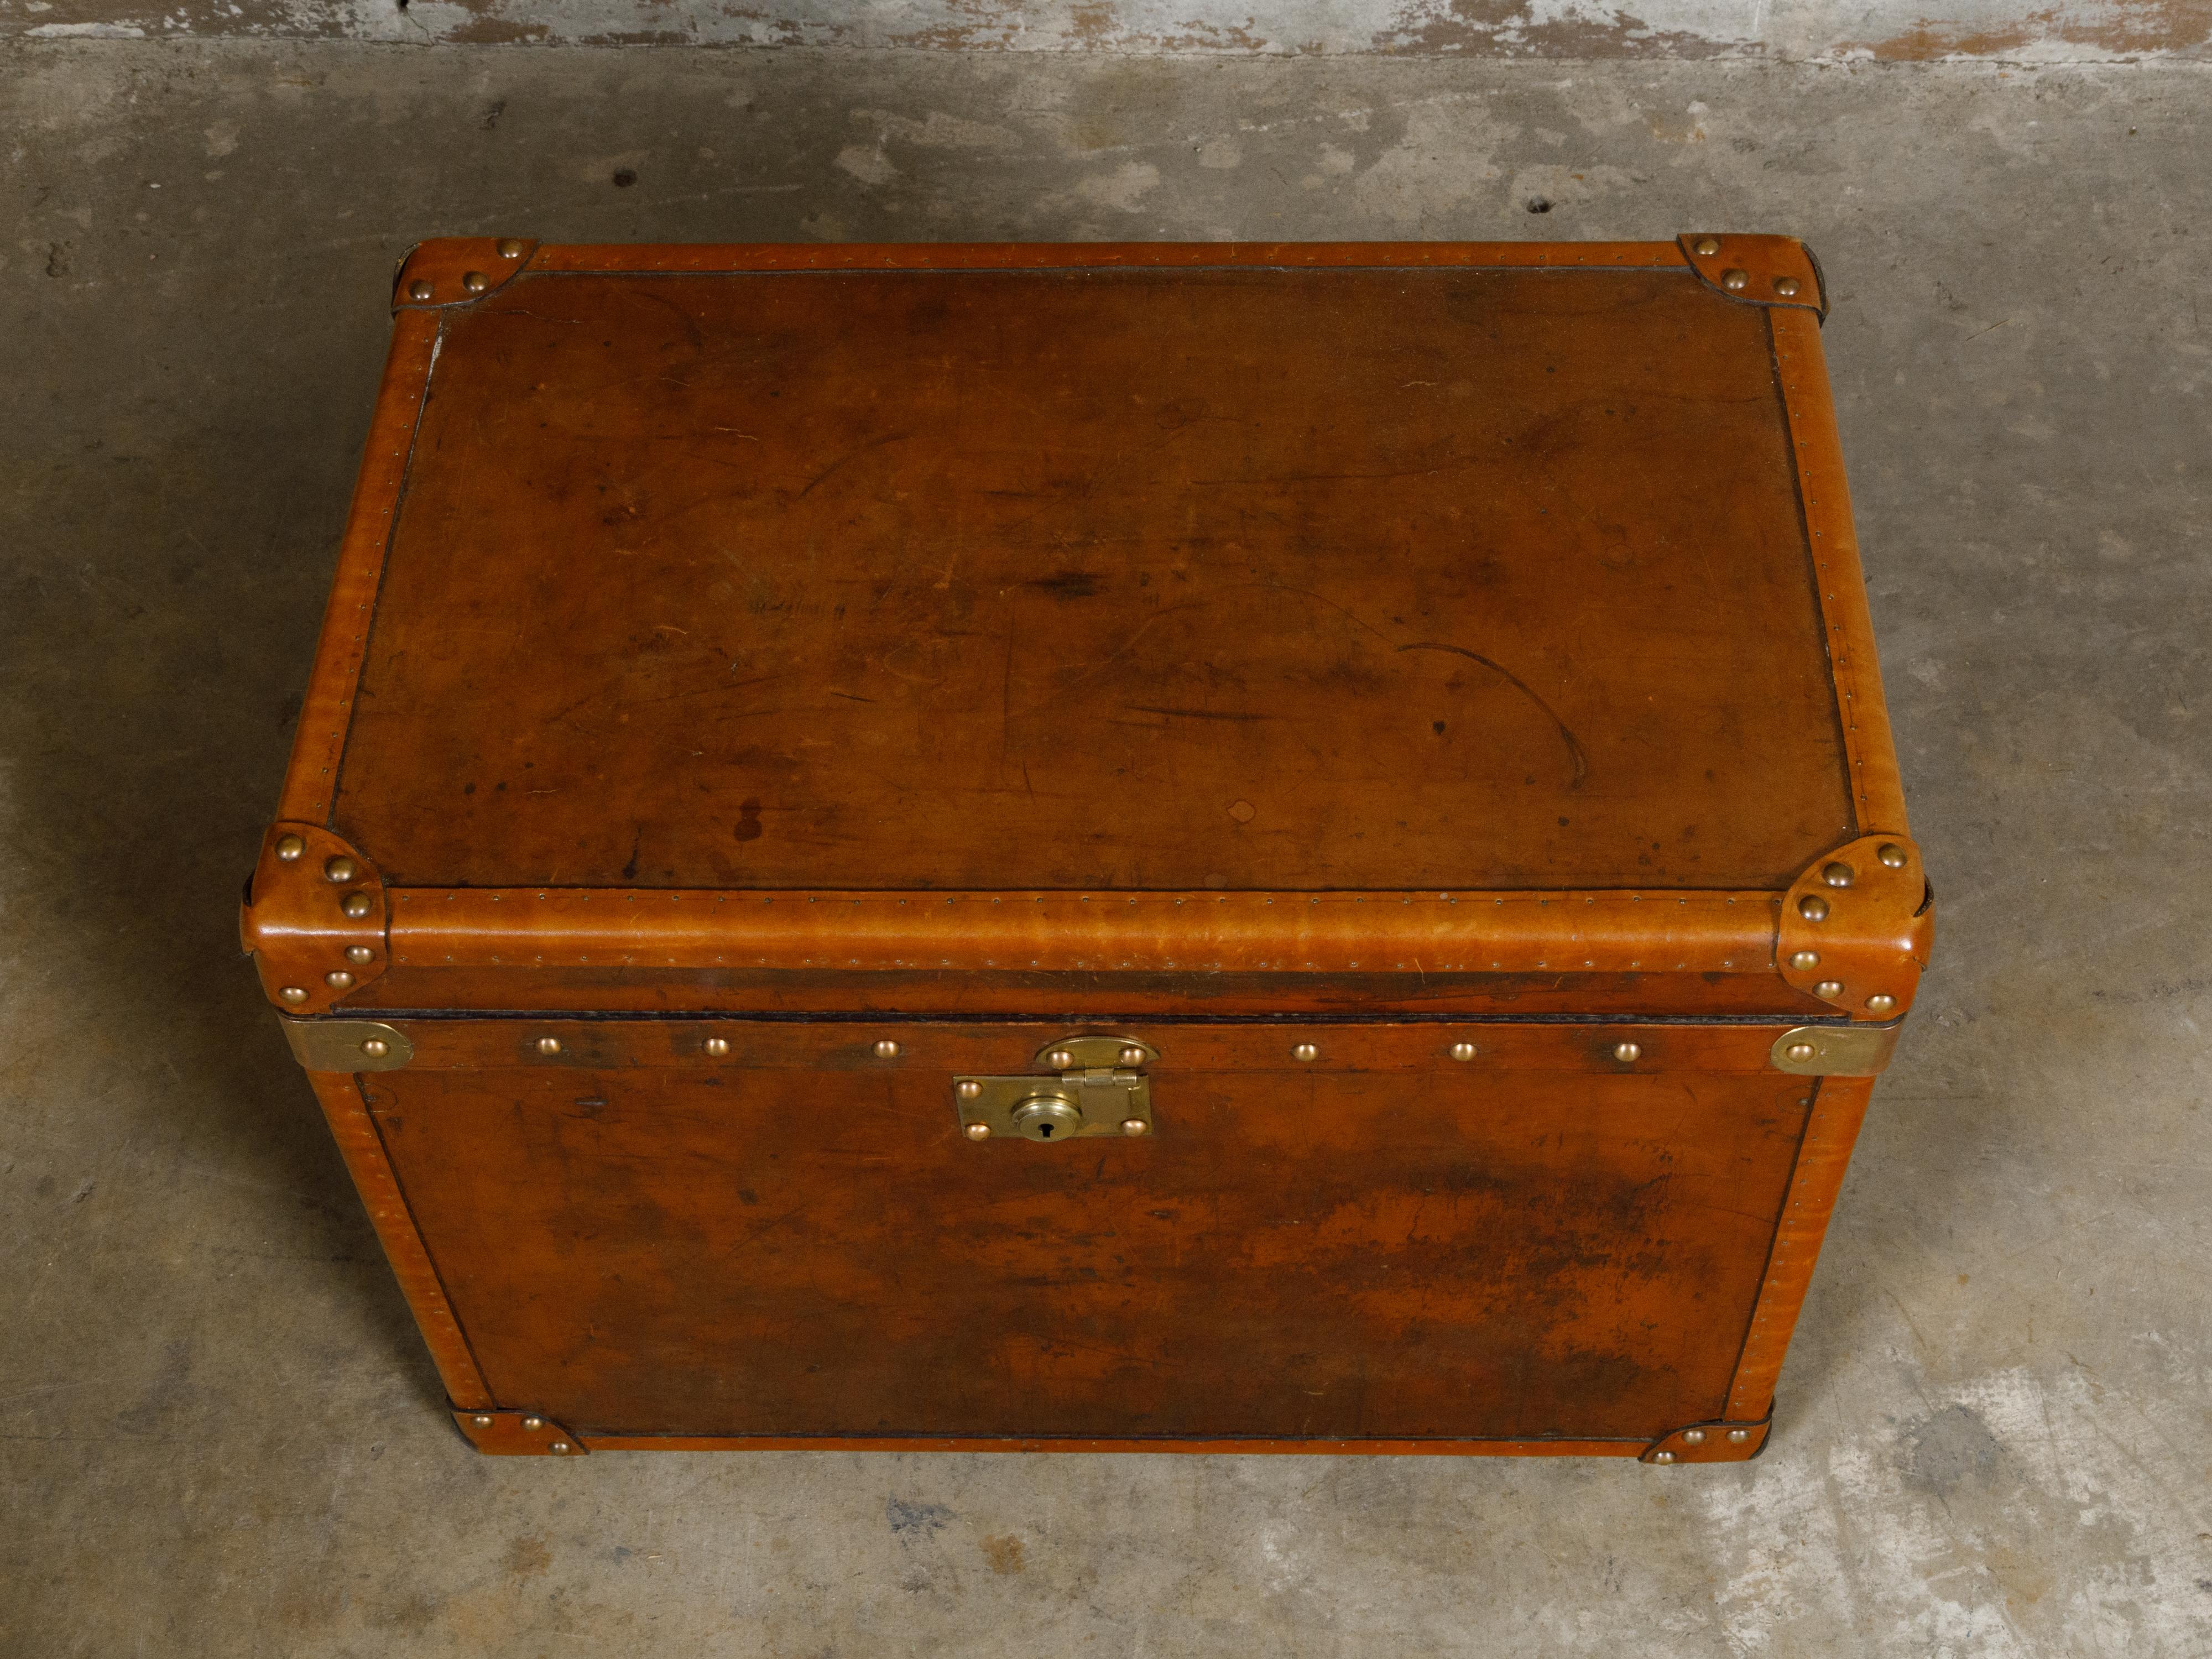 English Turn of the Century Leather Trunk with Brass Accents and Monogram, 1900s For Sale 2